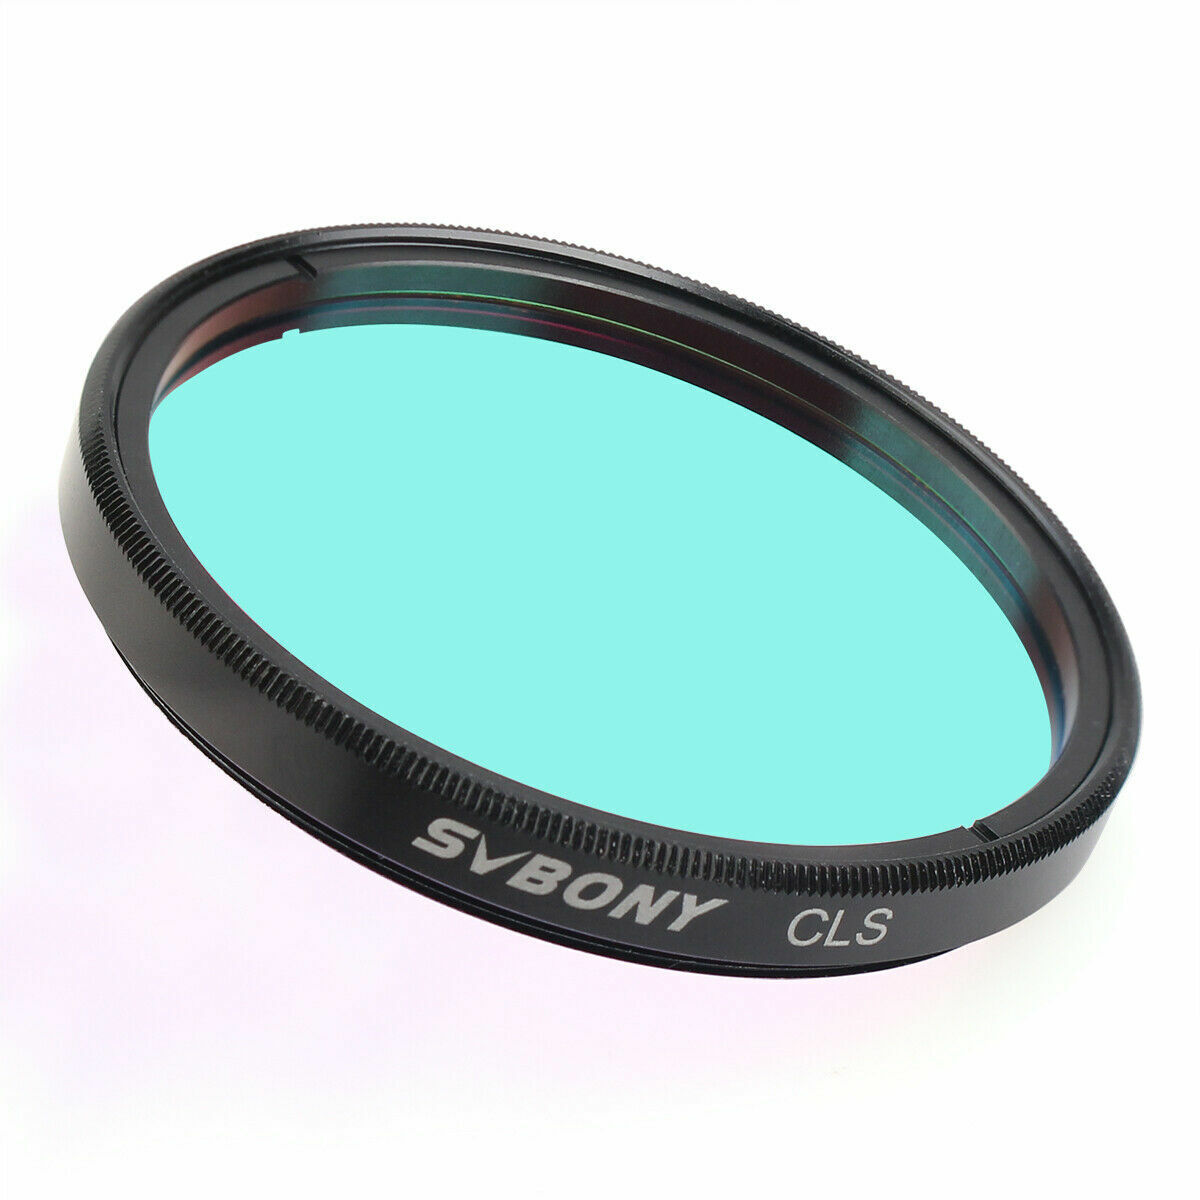 SVBONY 2in CLS Telescope Filter for Deep Sky Light Pollution Astronomy Eyepiece